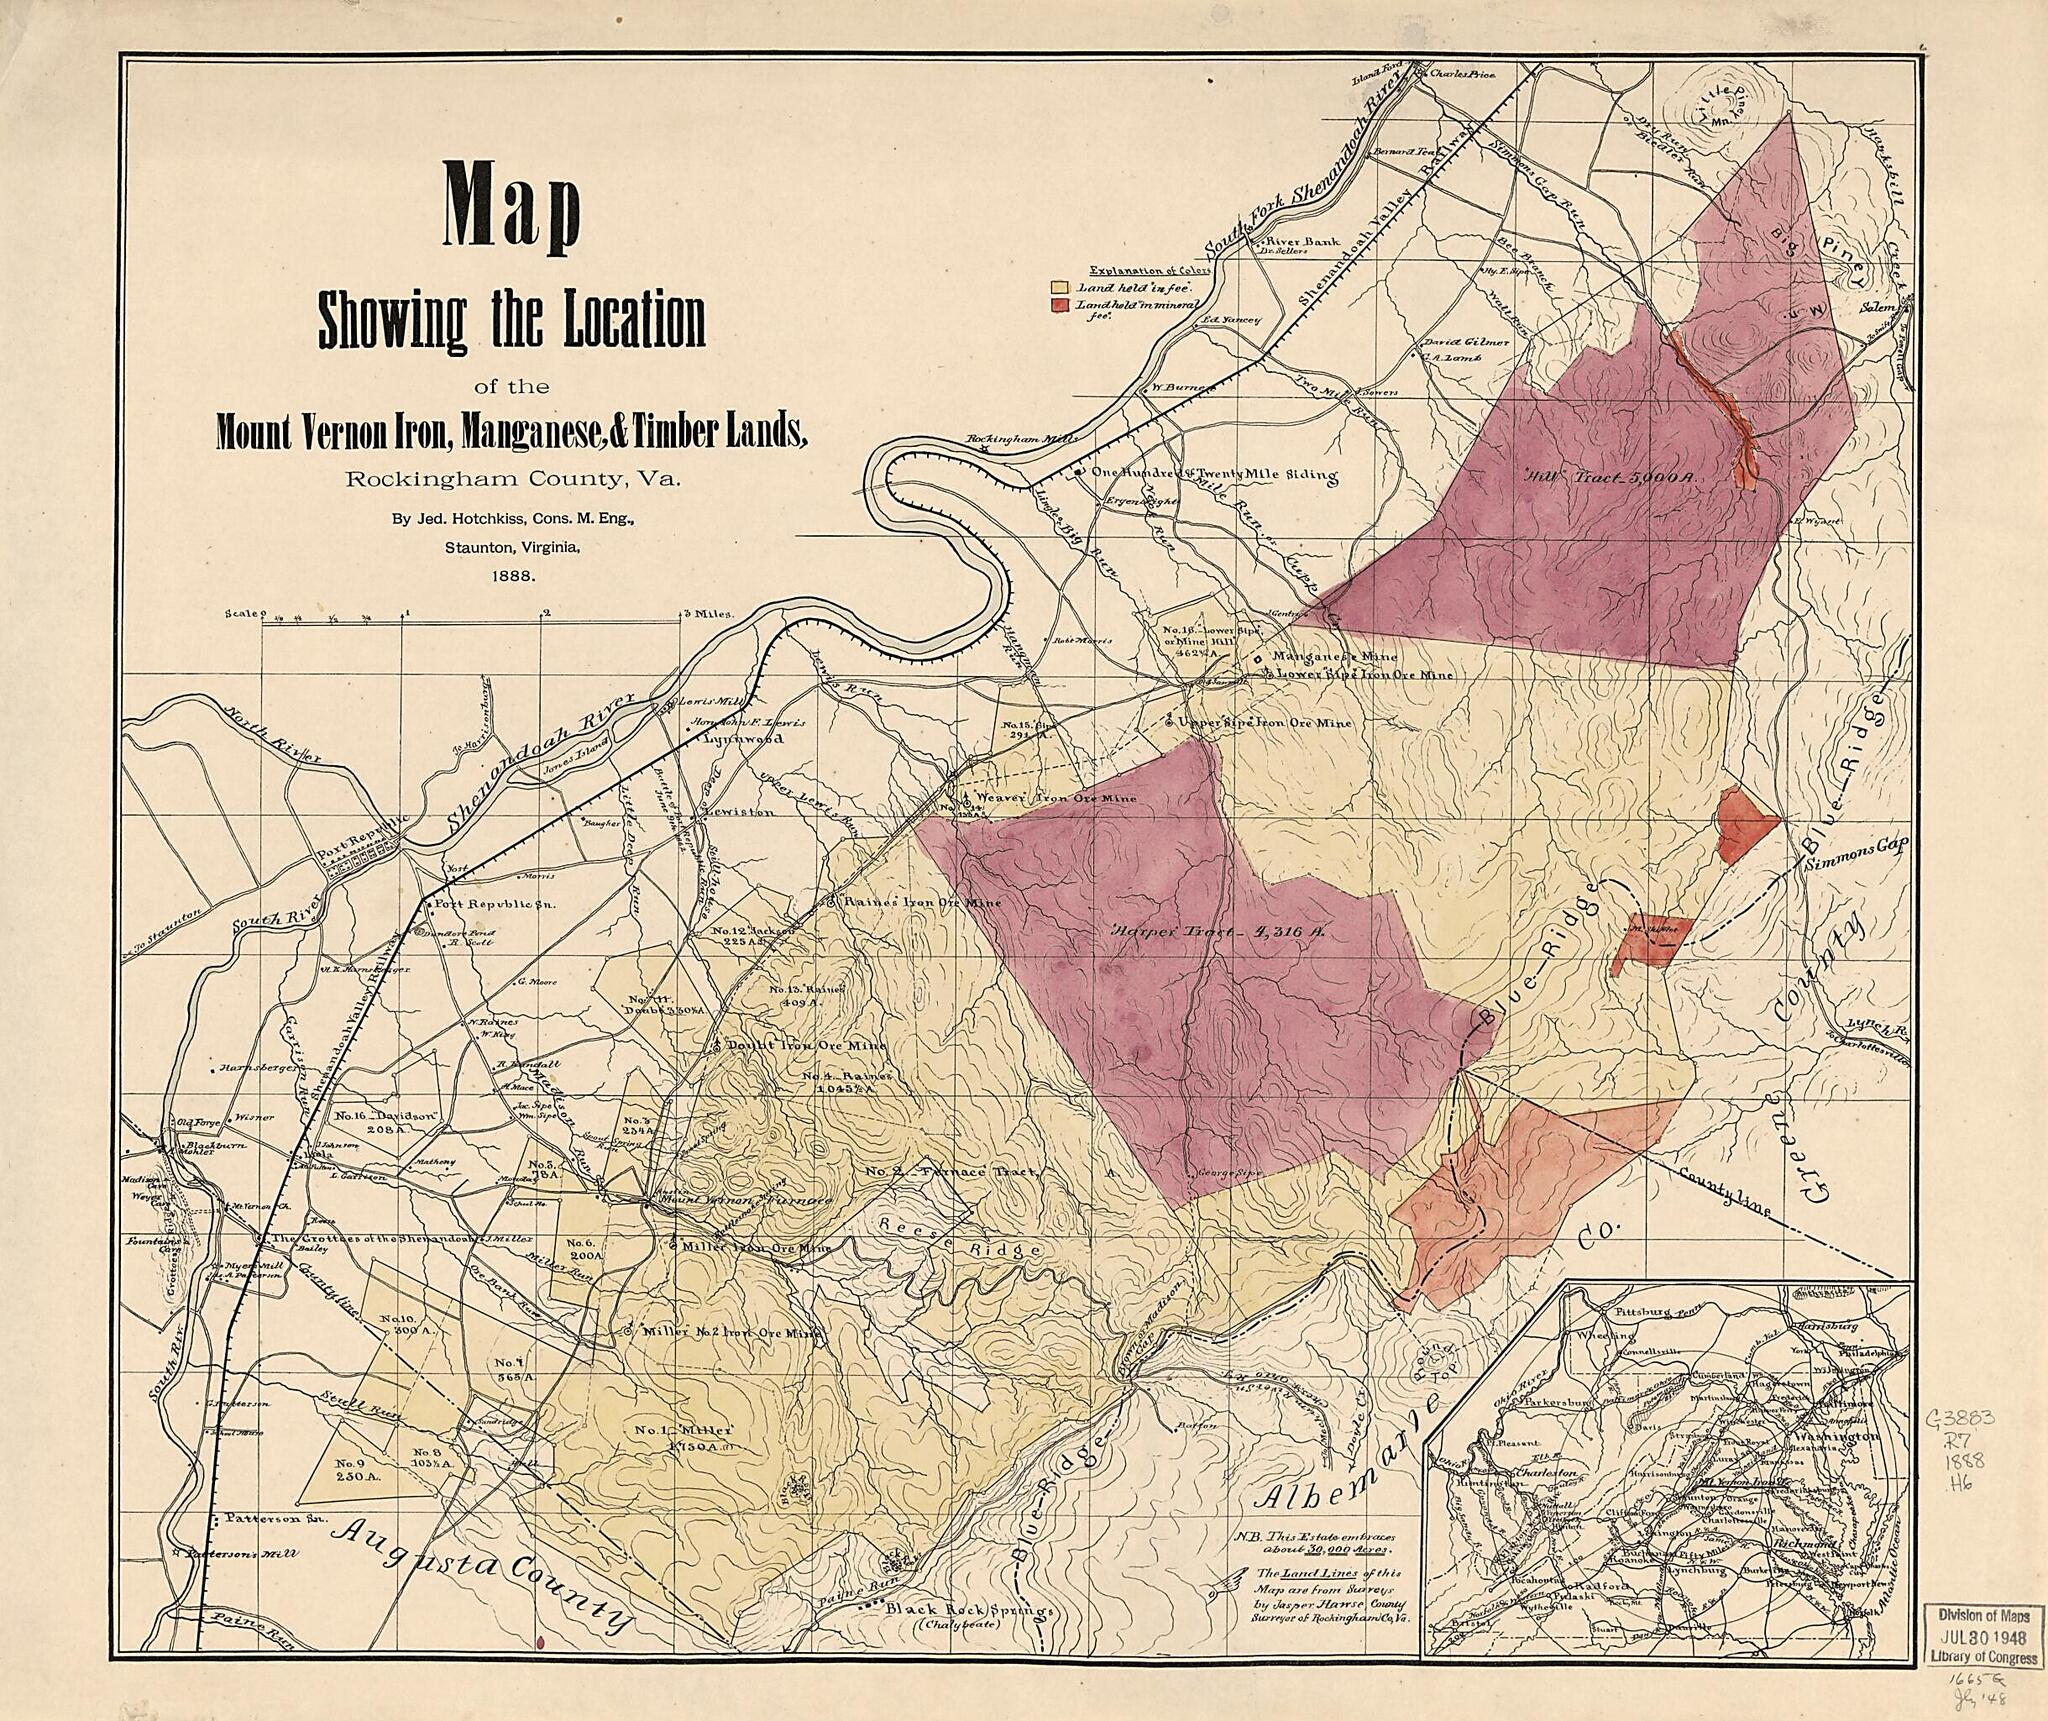 This old map of Map Showing the Location of the Mount Vernon Iron, Manganese &amp; Timber Lands, Rockingham County, Va from 1888 was created by Jasper Hawse, Jedediah Hotchkiss in 1888